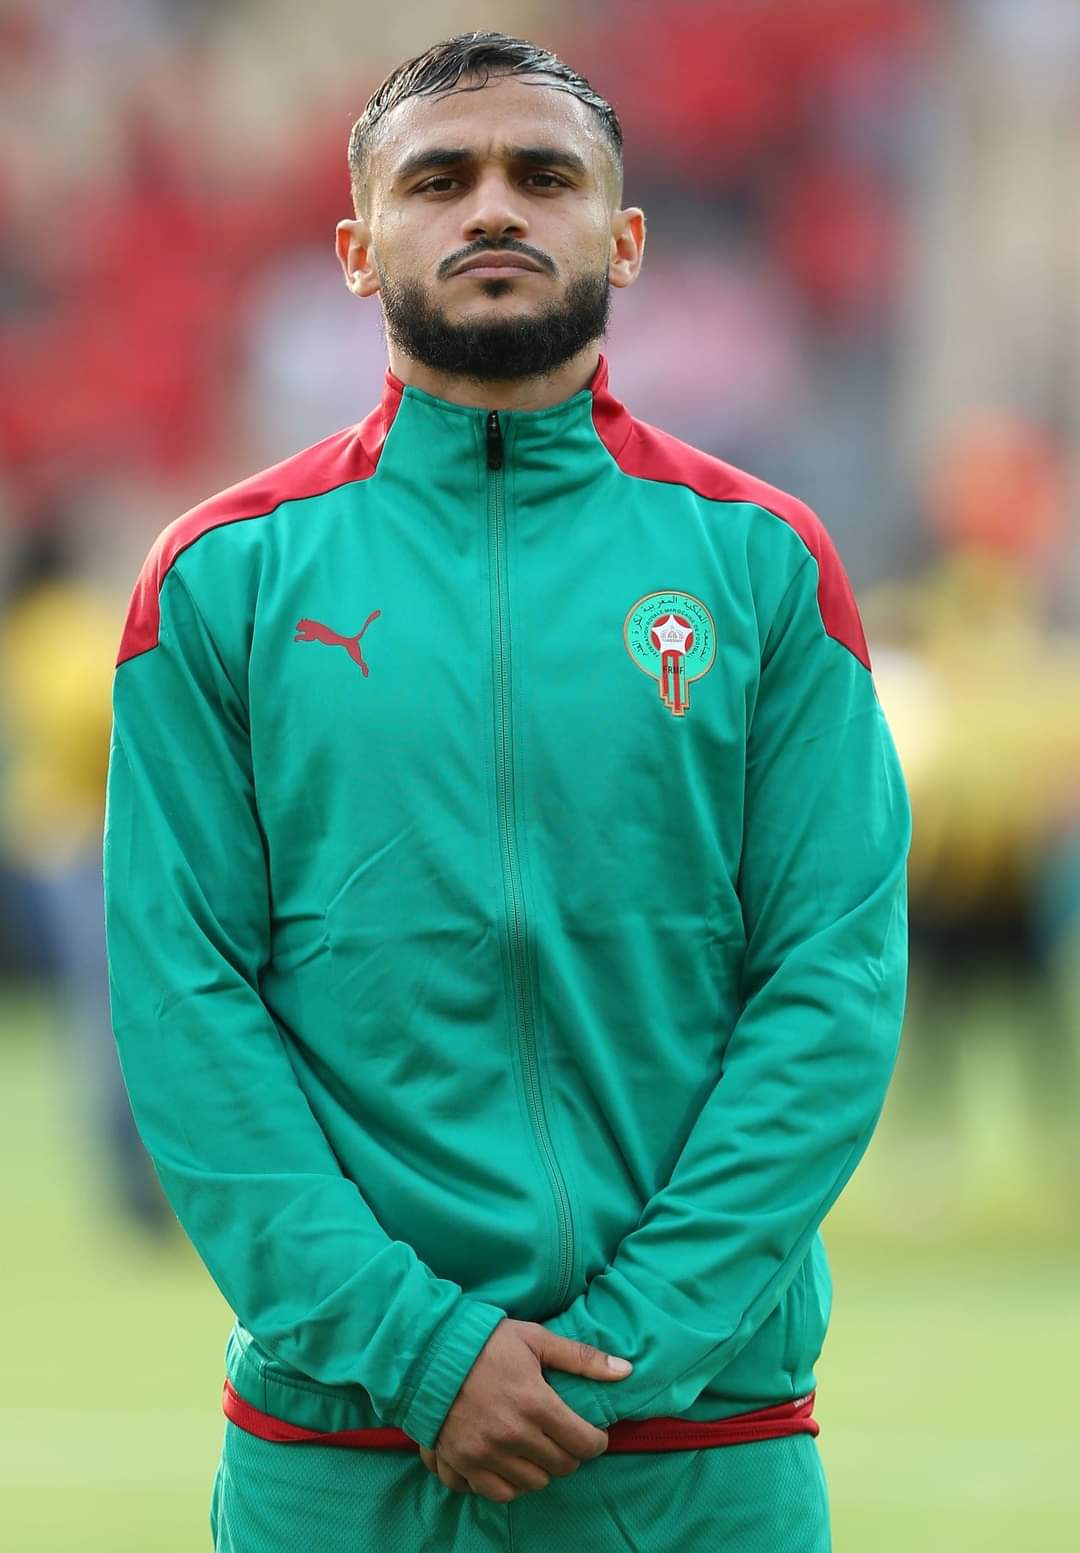 BOUFAL APOLOGISES TO THE WHOLE AFRICA